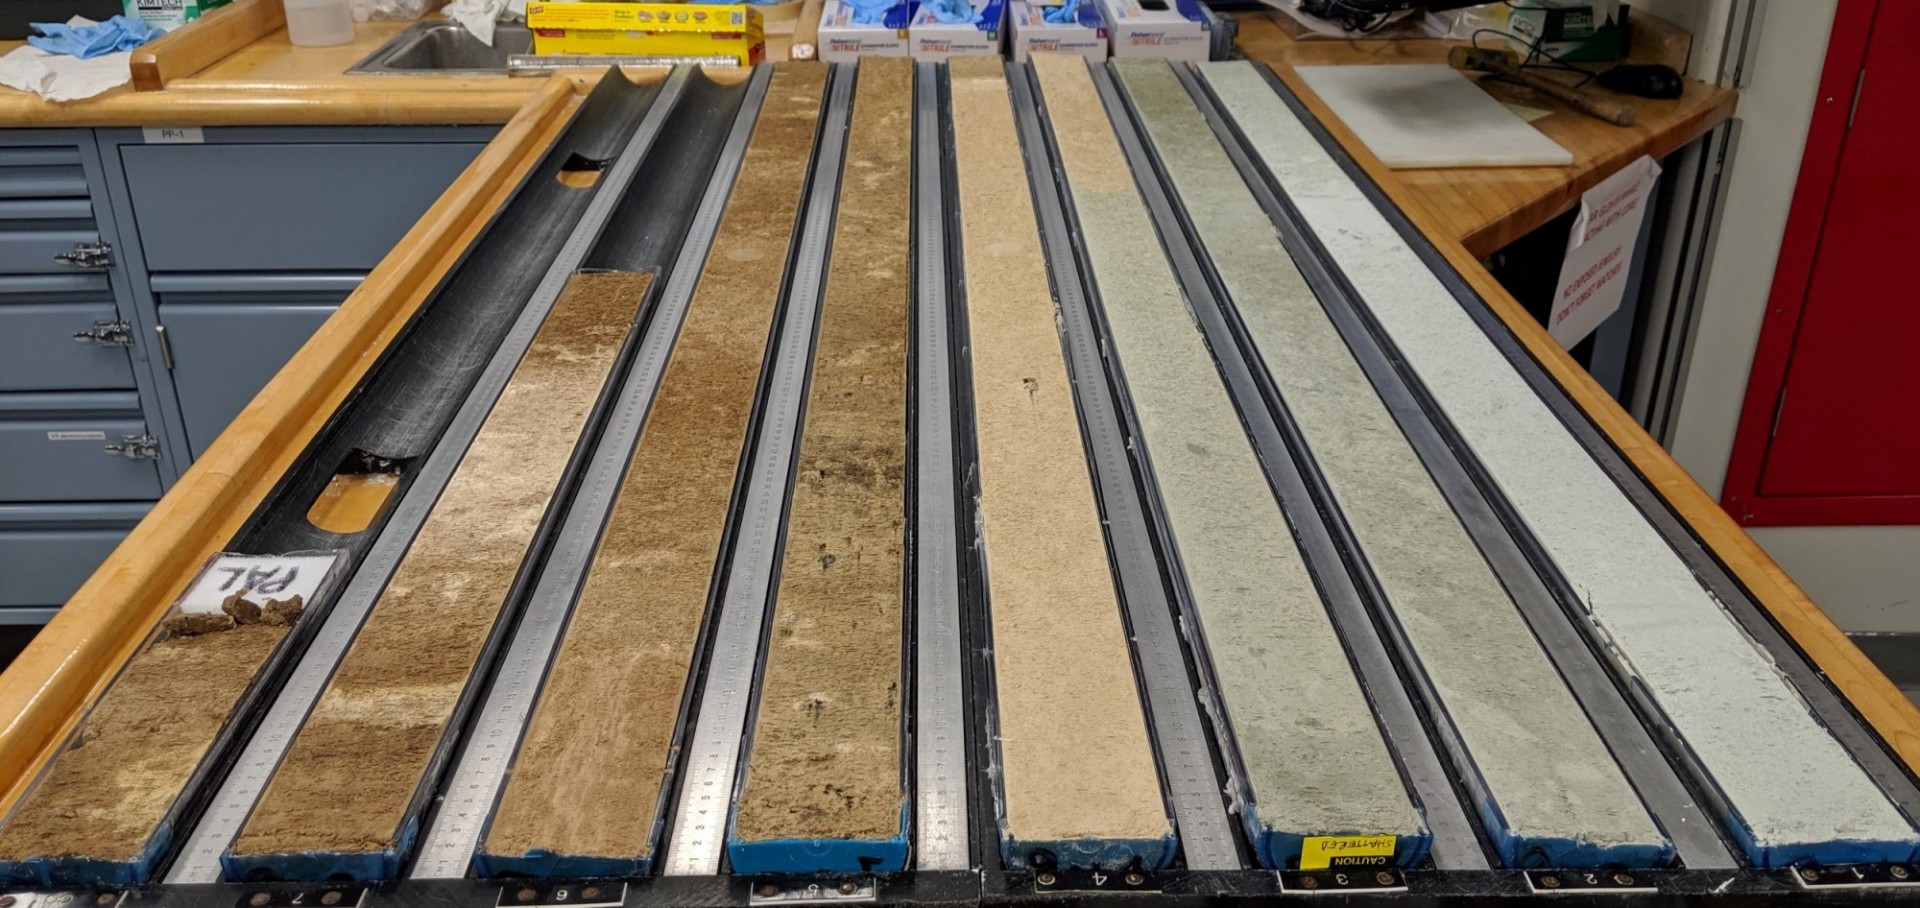 Sediment cores from the Pacific Southern Ocean (IODP Expedition 383)